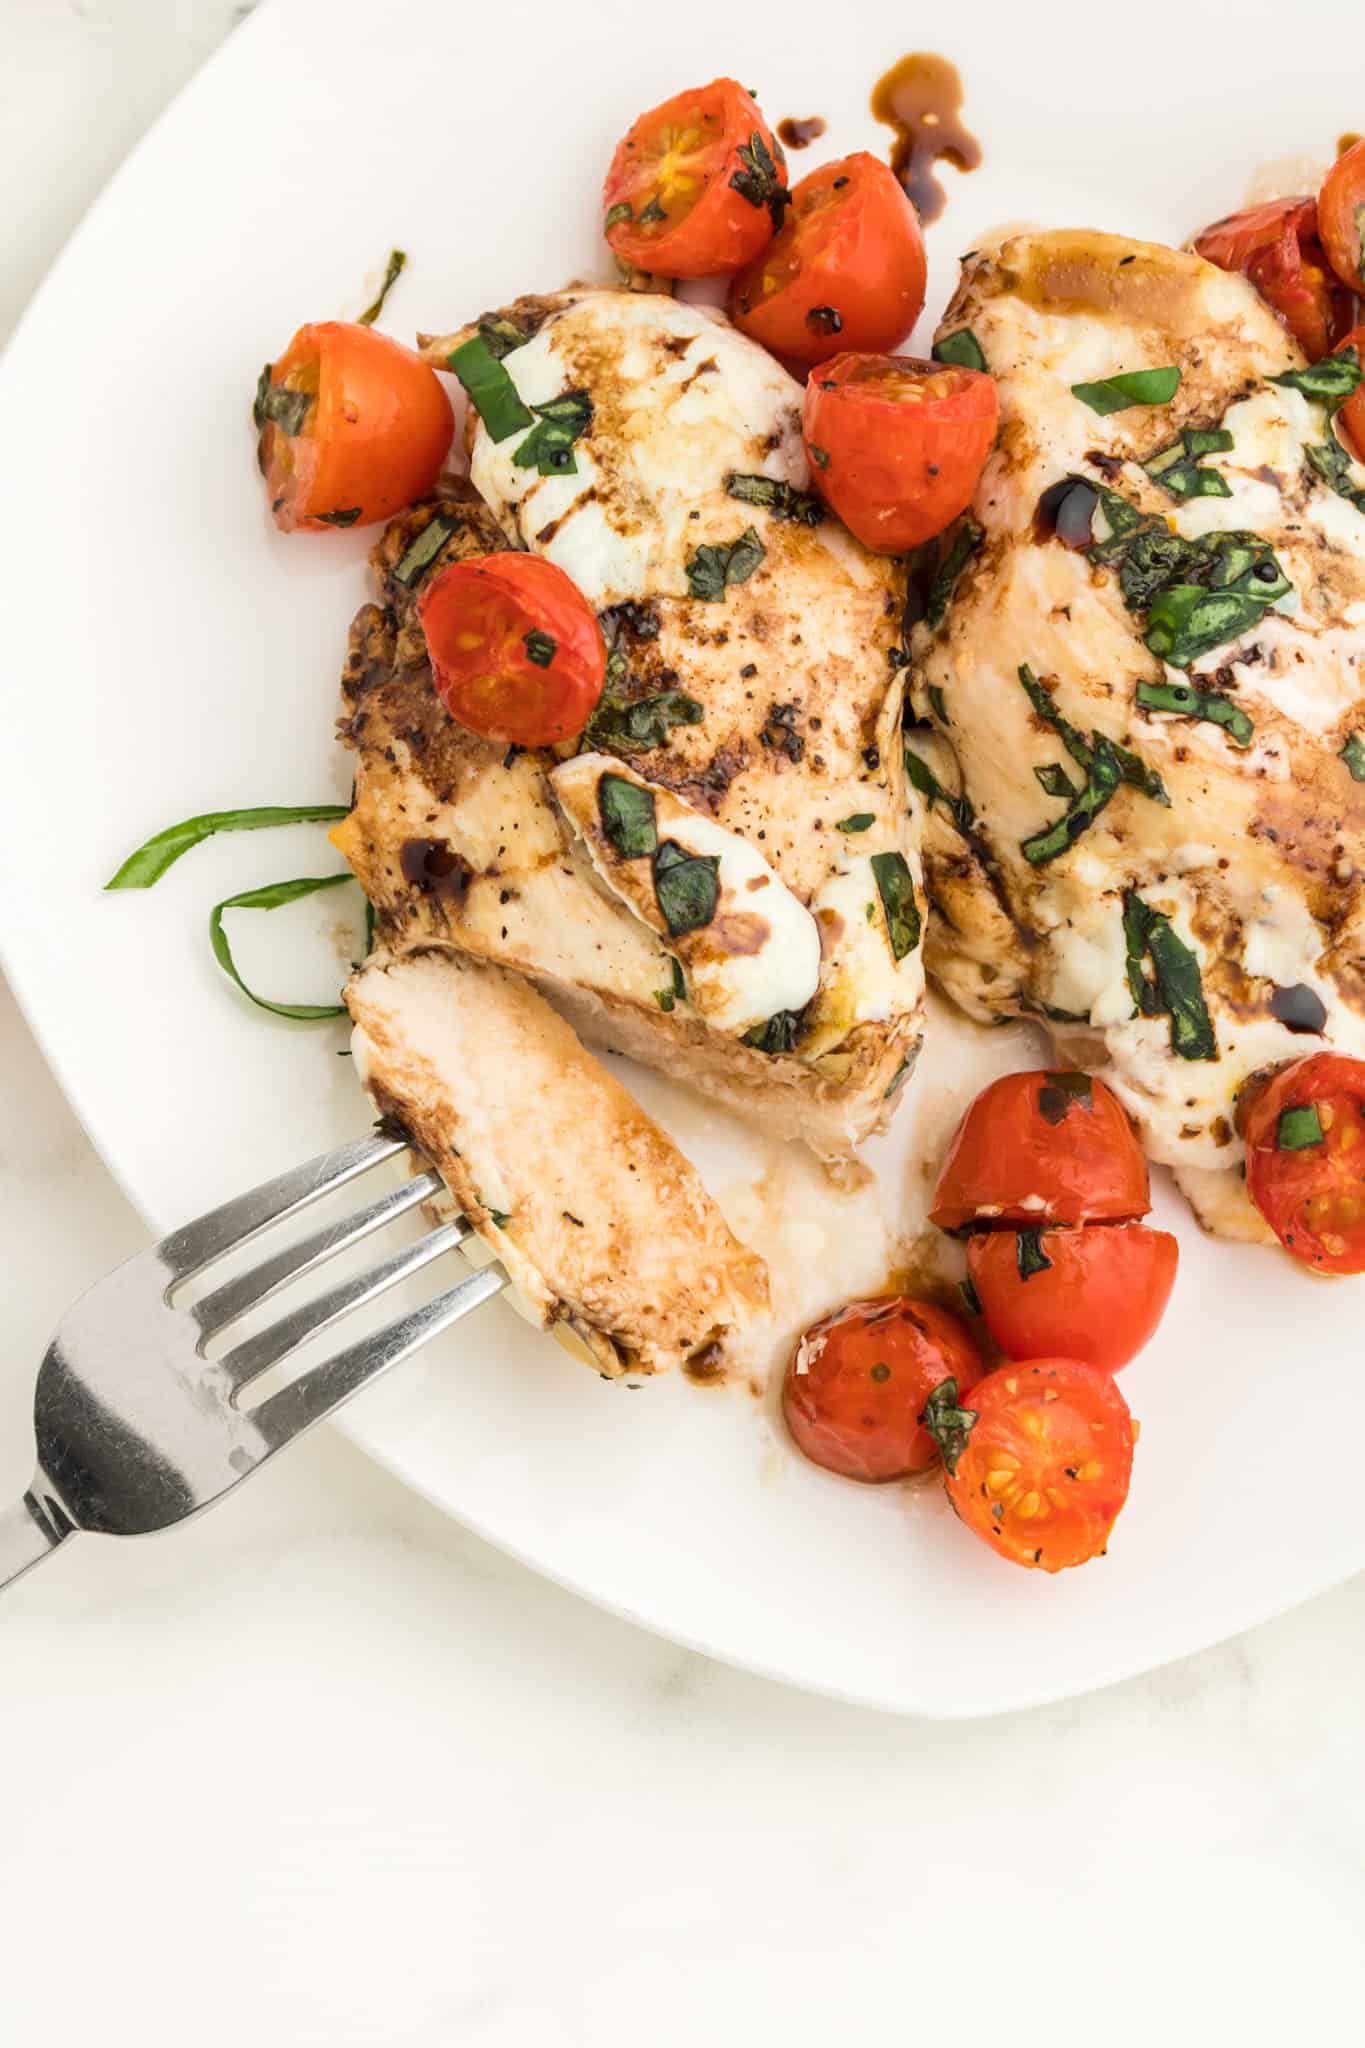 Caprese Chicken is a delicious chicken dish loaded with cherry tomatoes, fresh mozzarella, basil and balsamic vinaigrette.